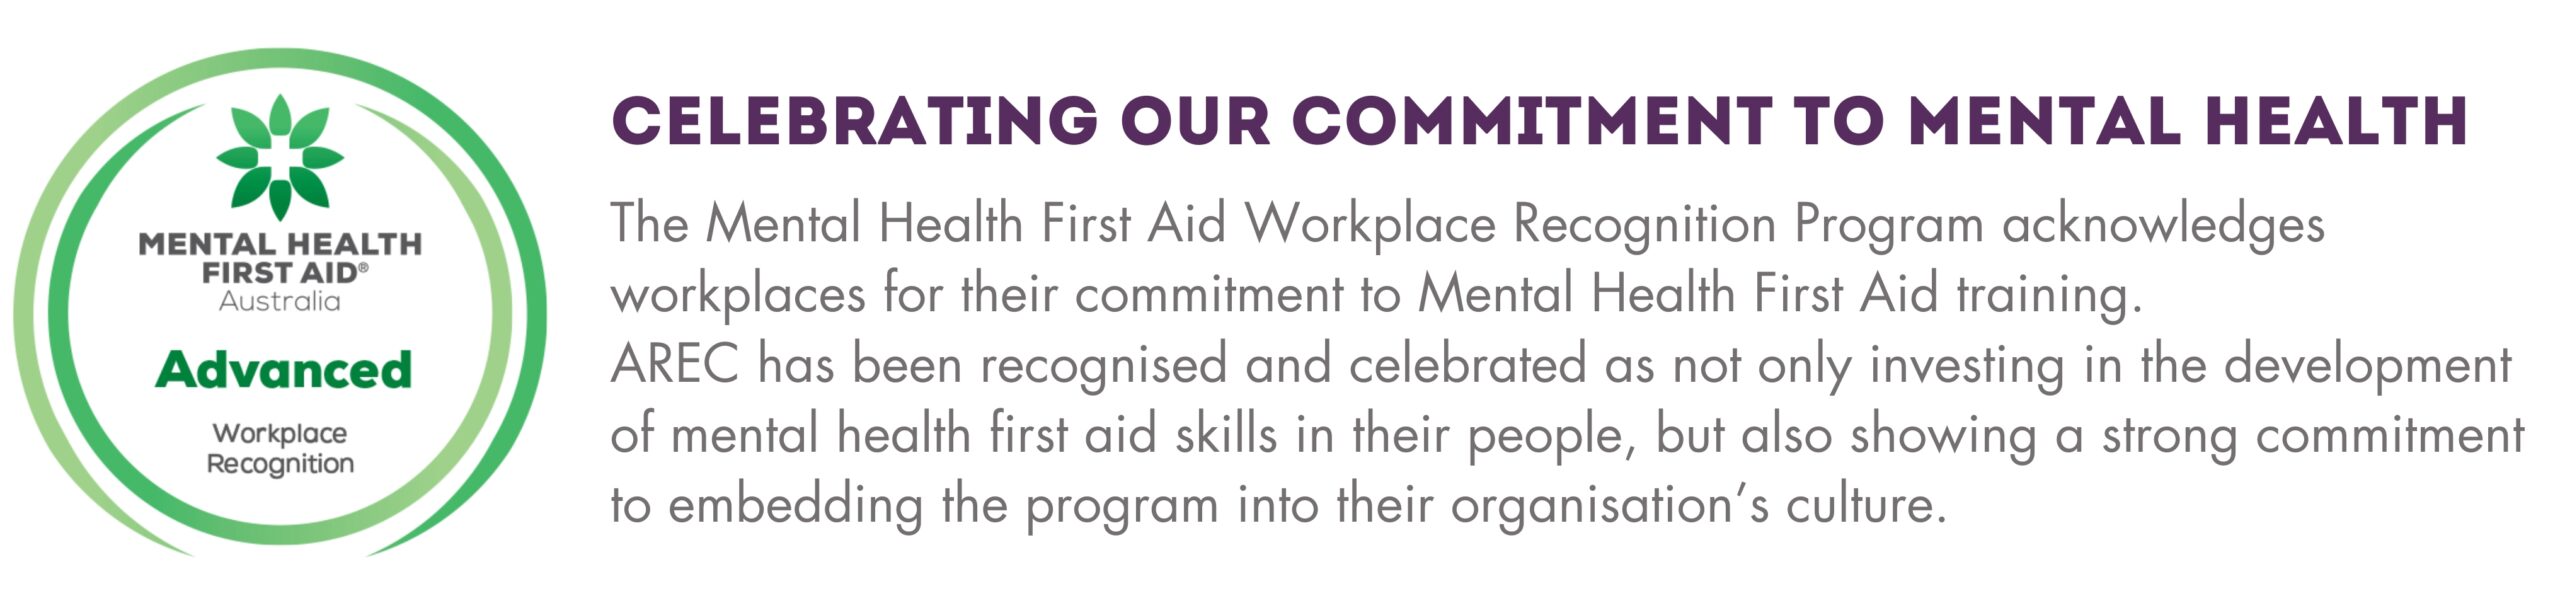 MHFA - Skilled Workplace Recognition AREC VET